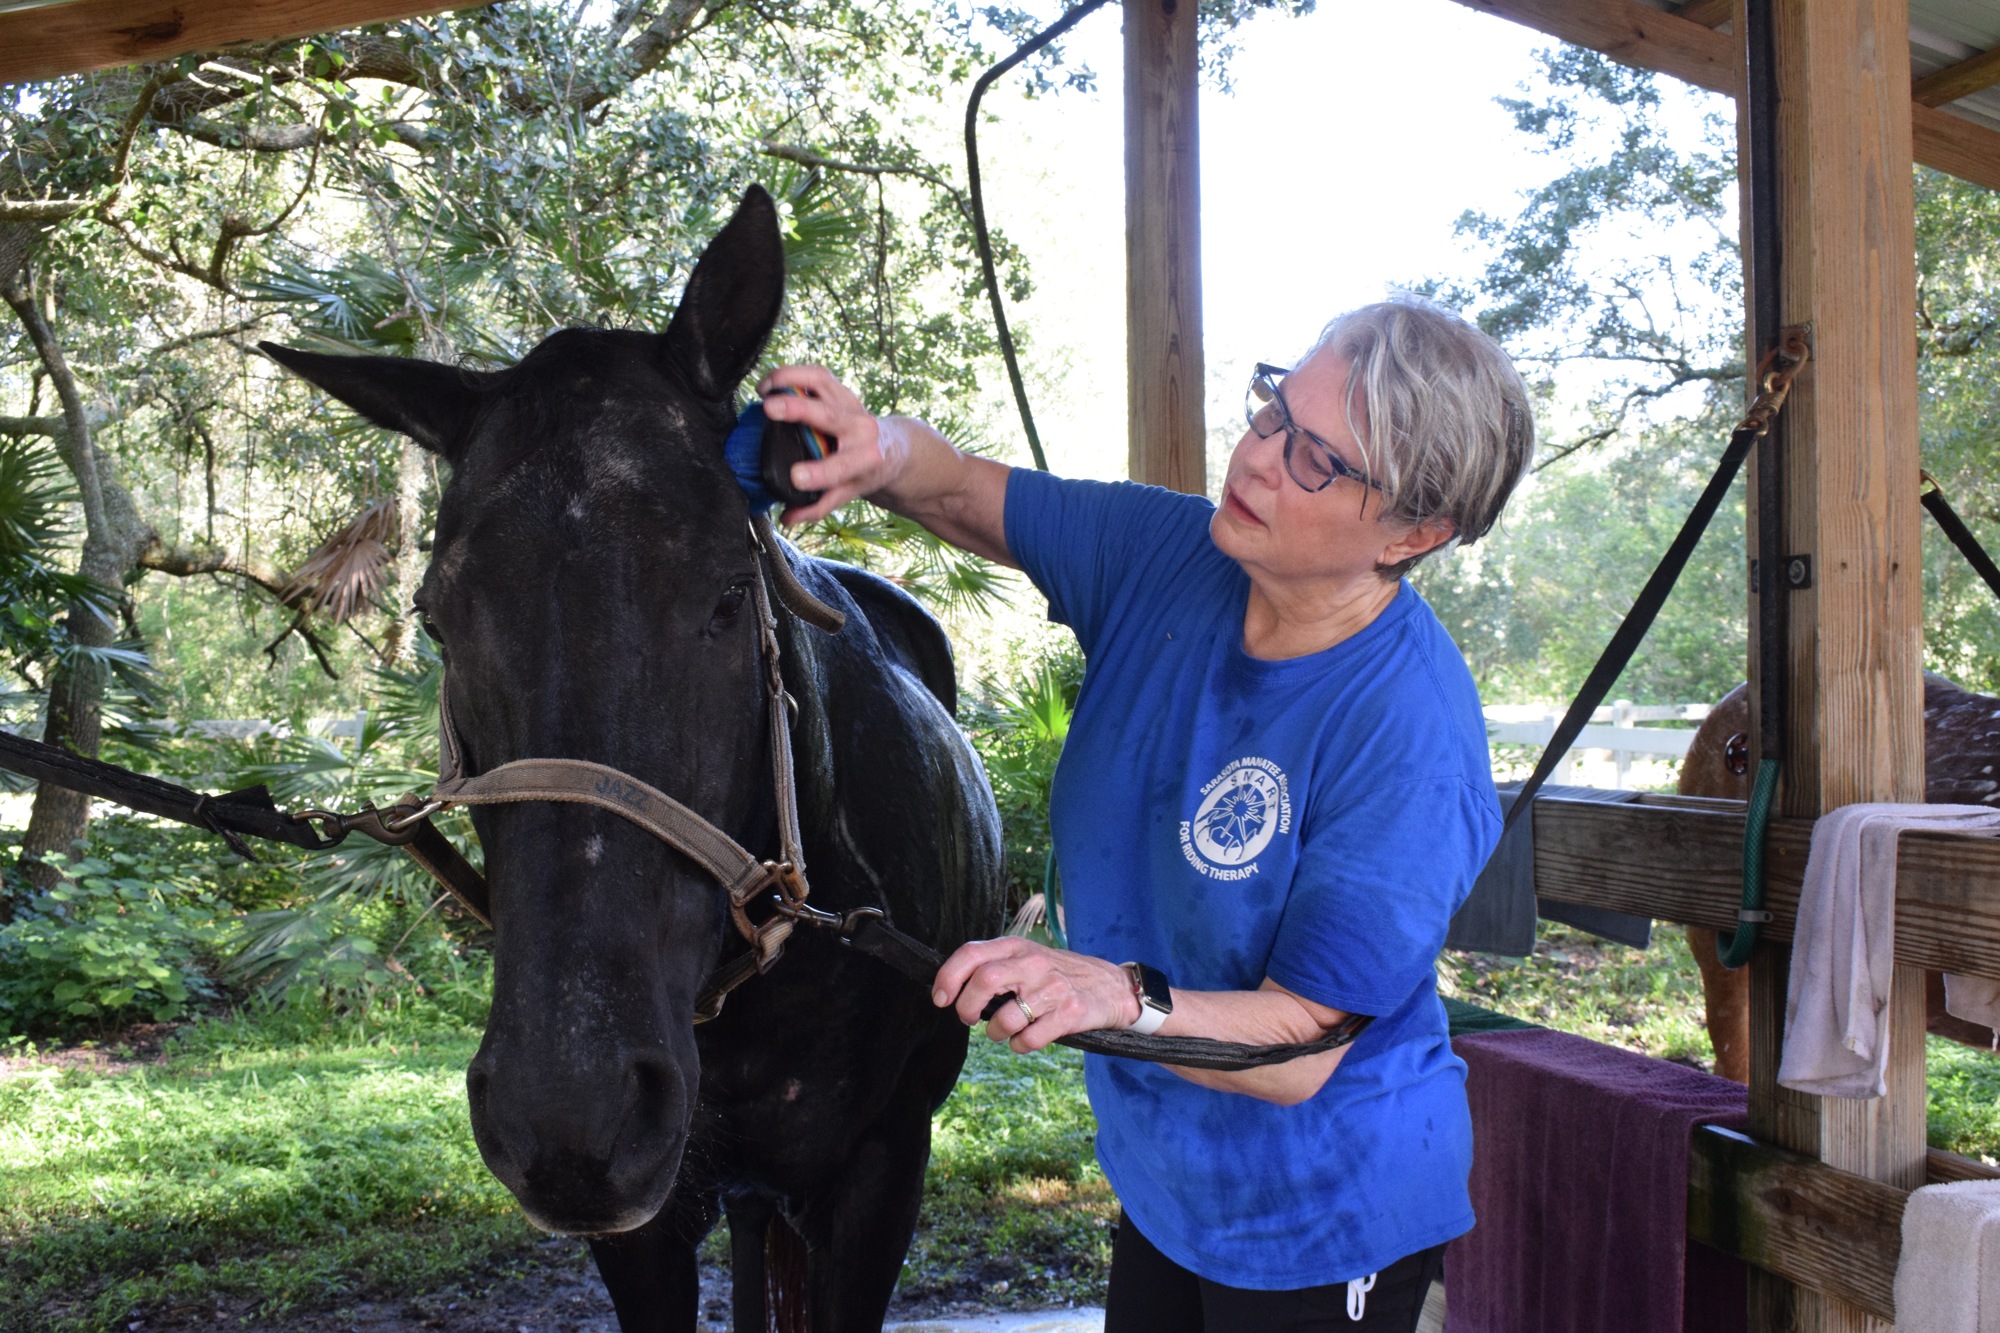 Jazz stands still while Terri Arnold, a volunteer for Sarasota Manatee Association for Riding Therapy, scrubs Jazz's head. People will get to meet Jazz at the open house. File photo.